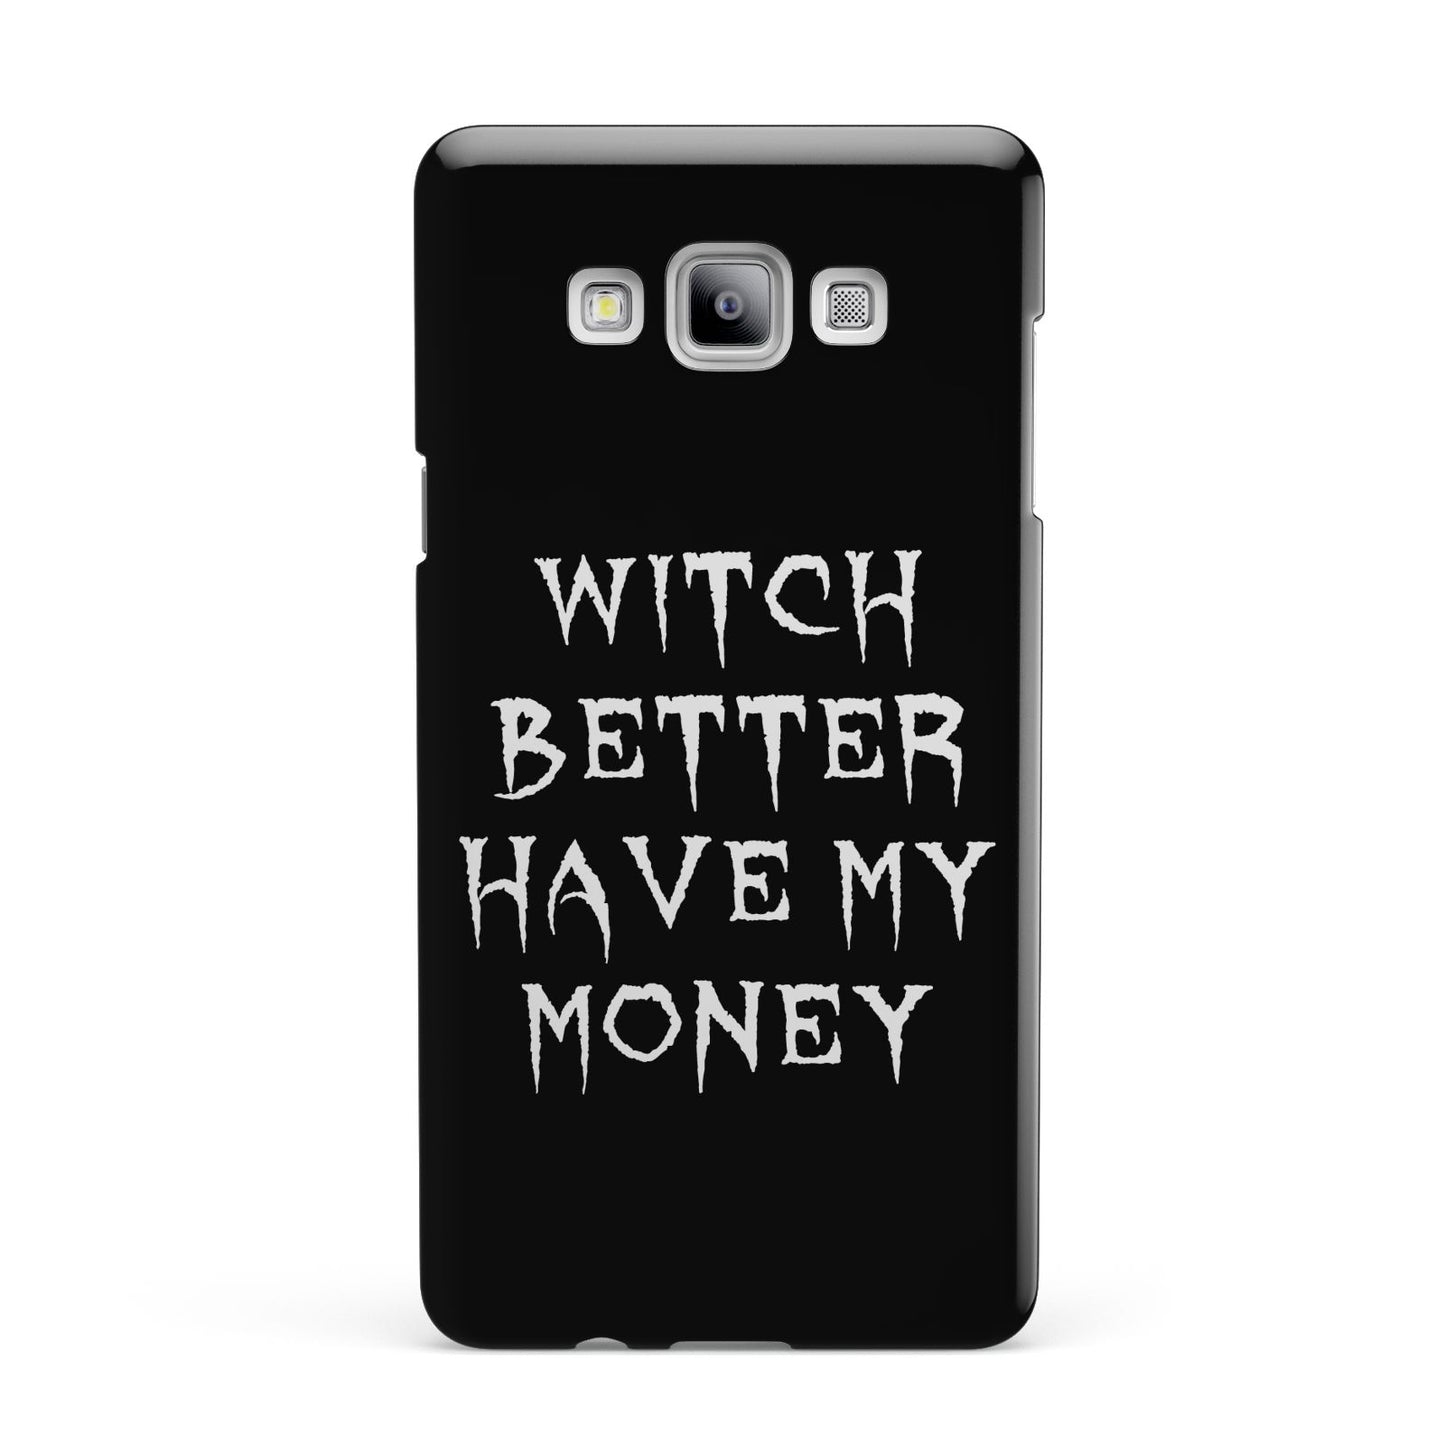 Witch Better Have My Money Samsung Galaxy A7 2015 Case